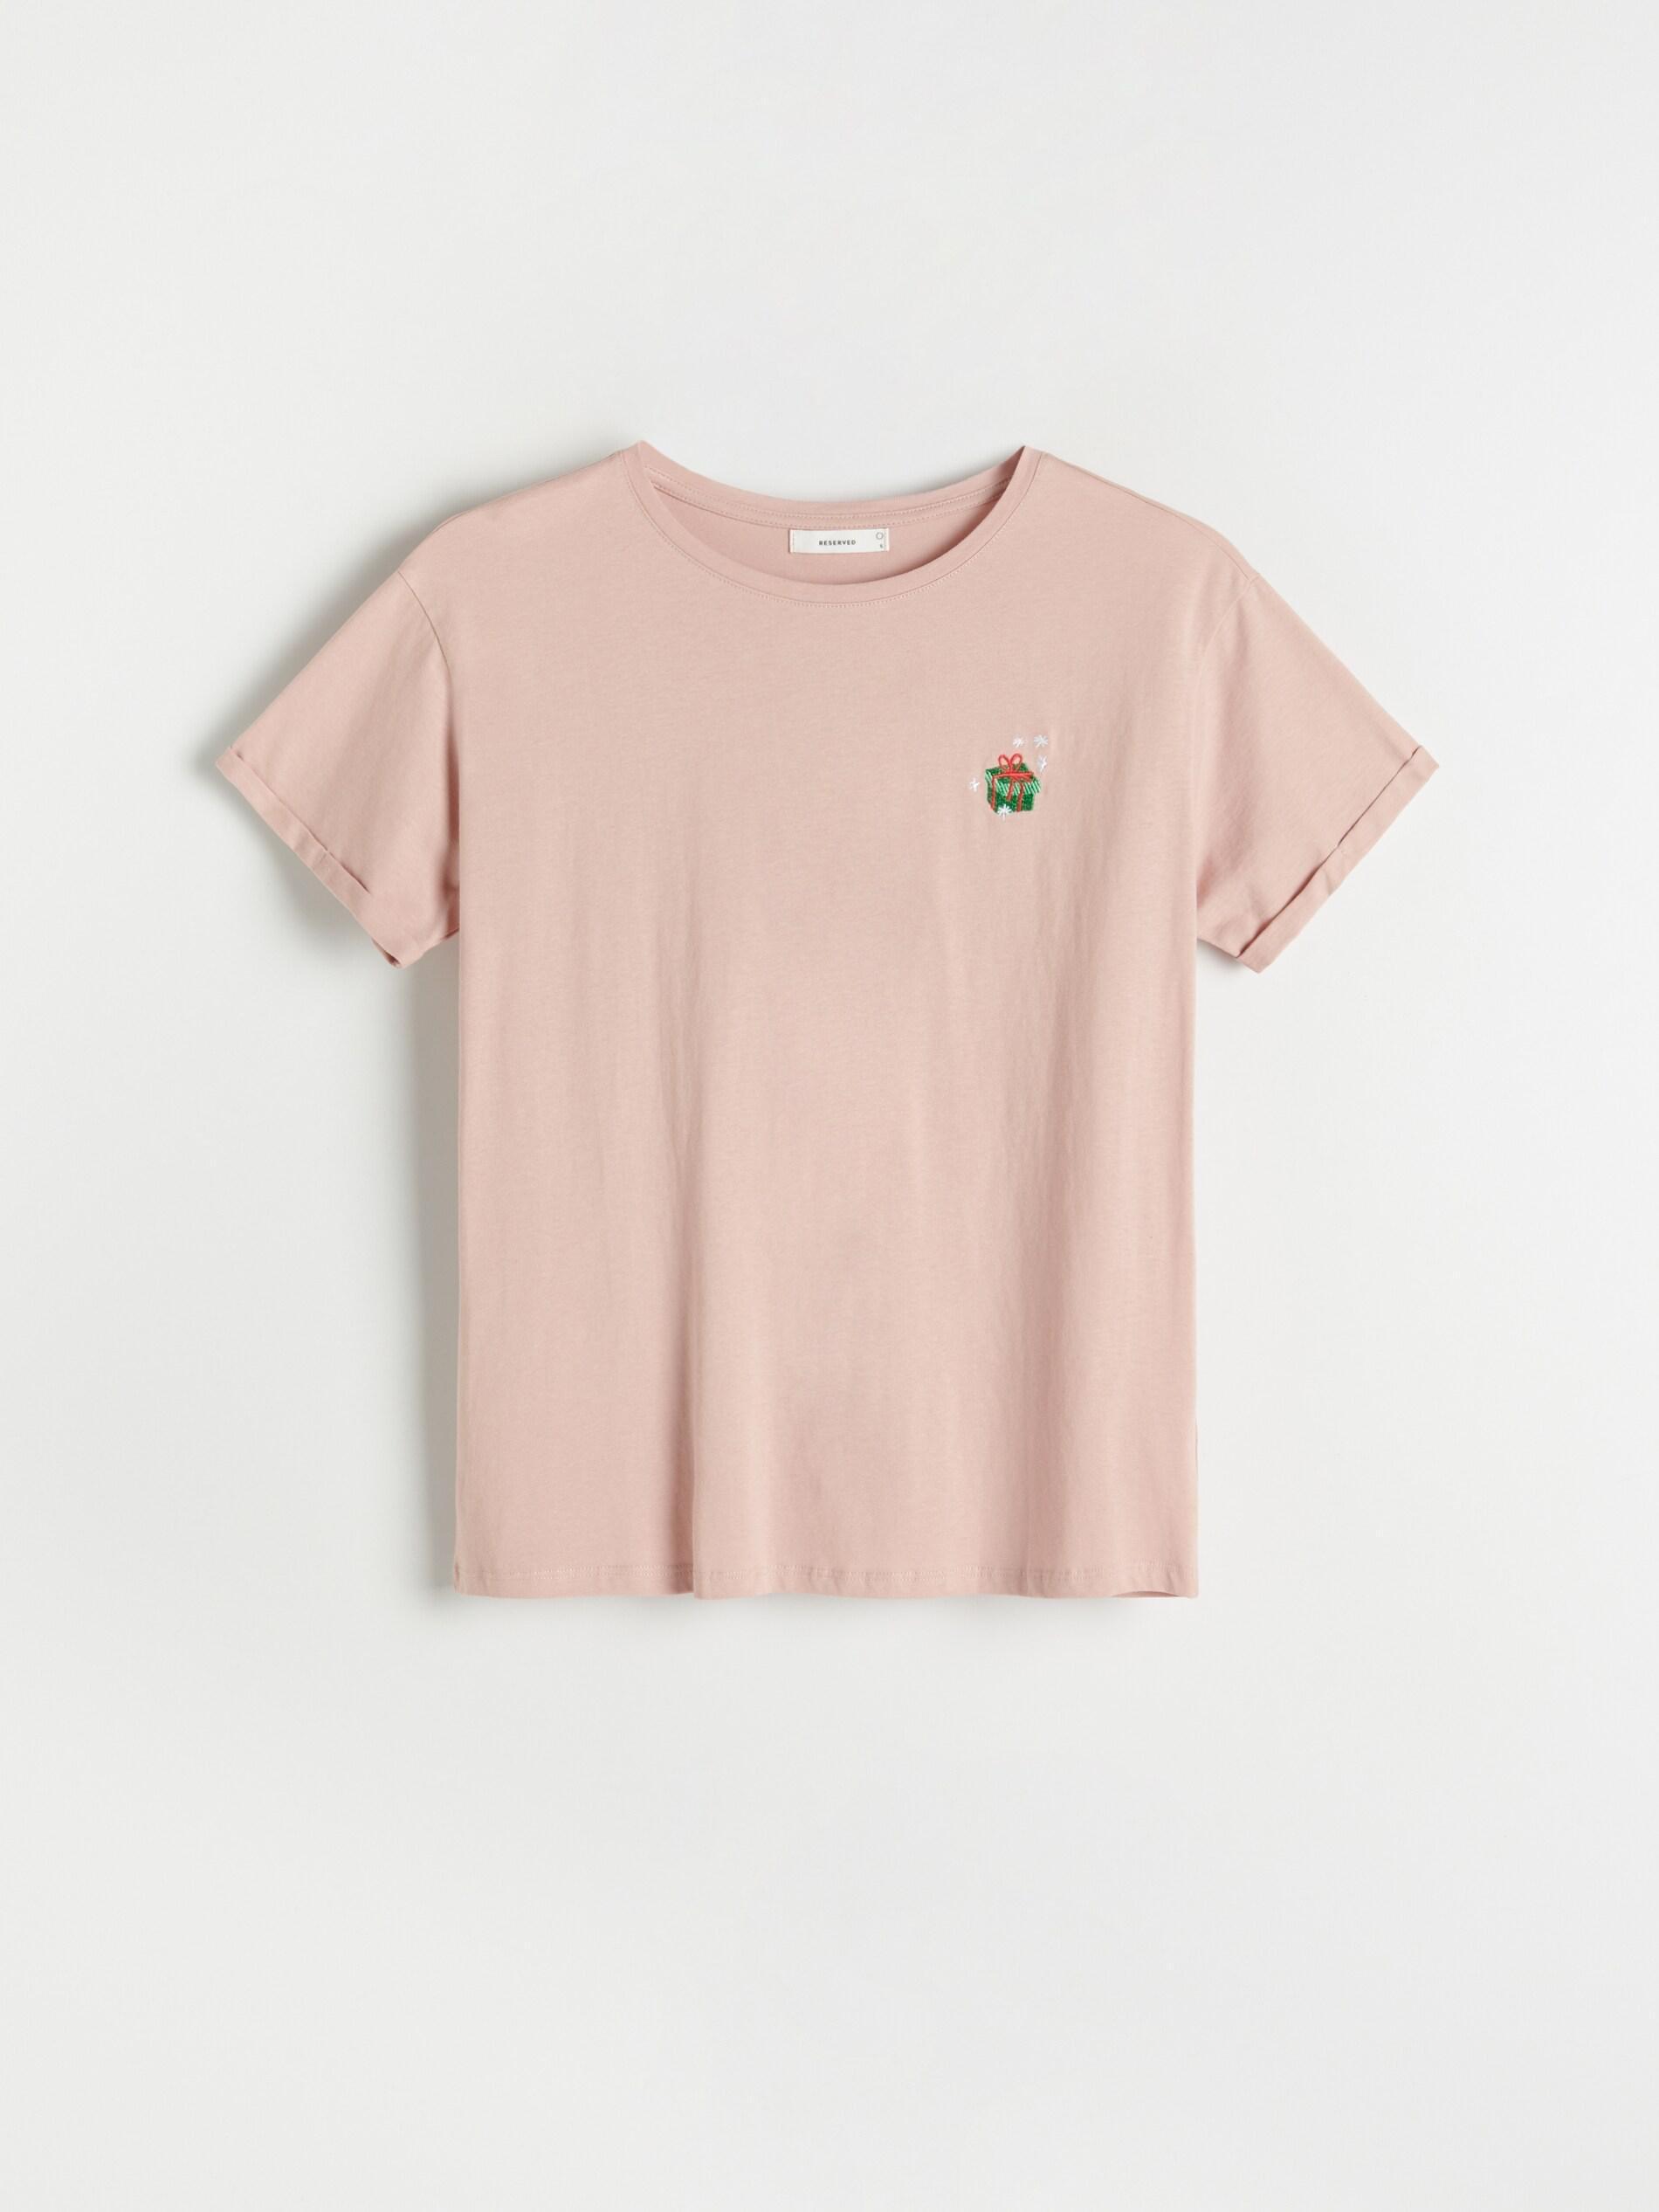 Reserved - Pastel Pink T-Shirt With A Festive Motif, Women